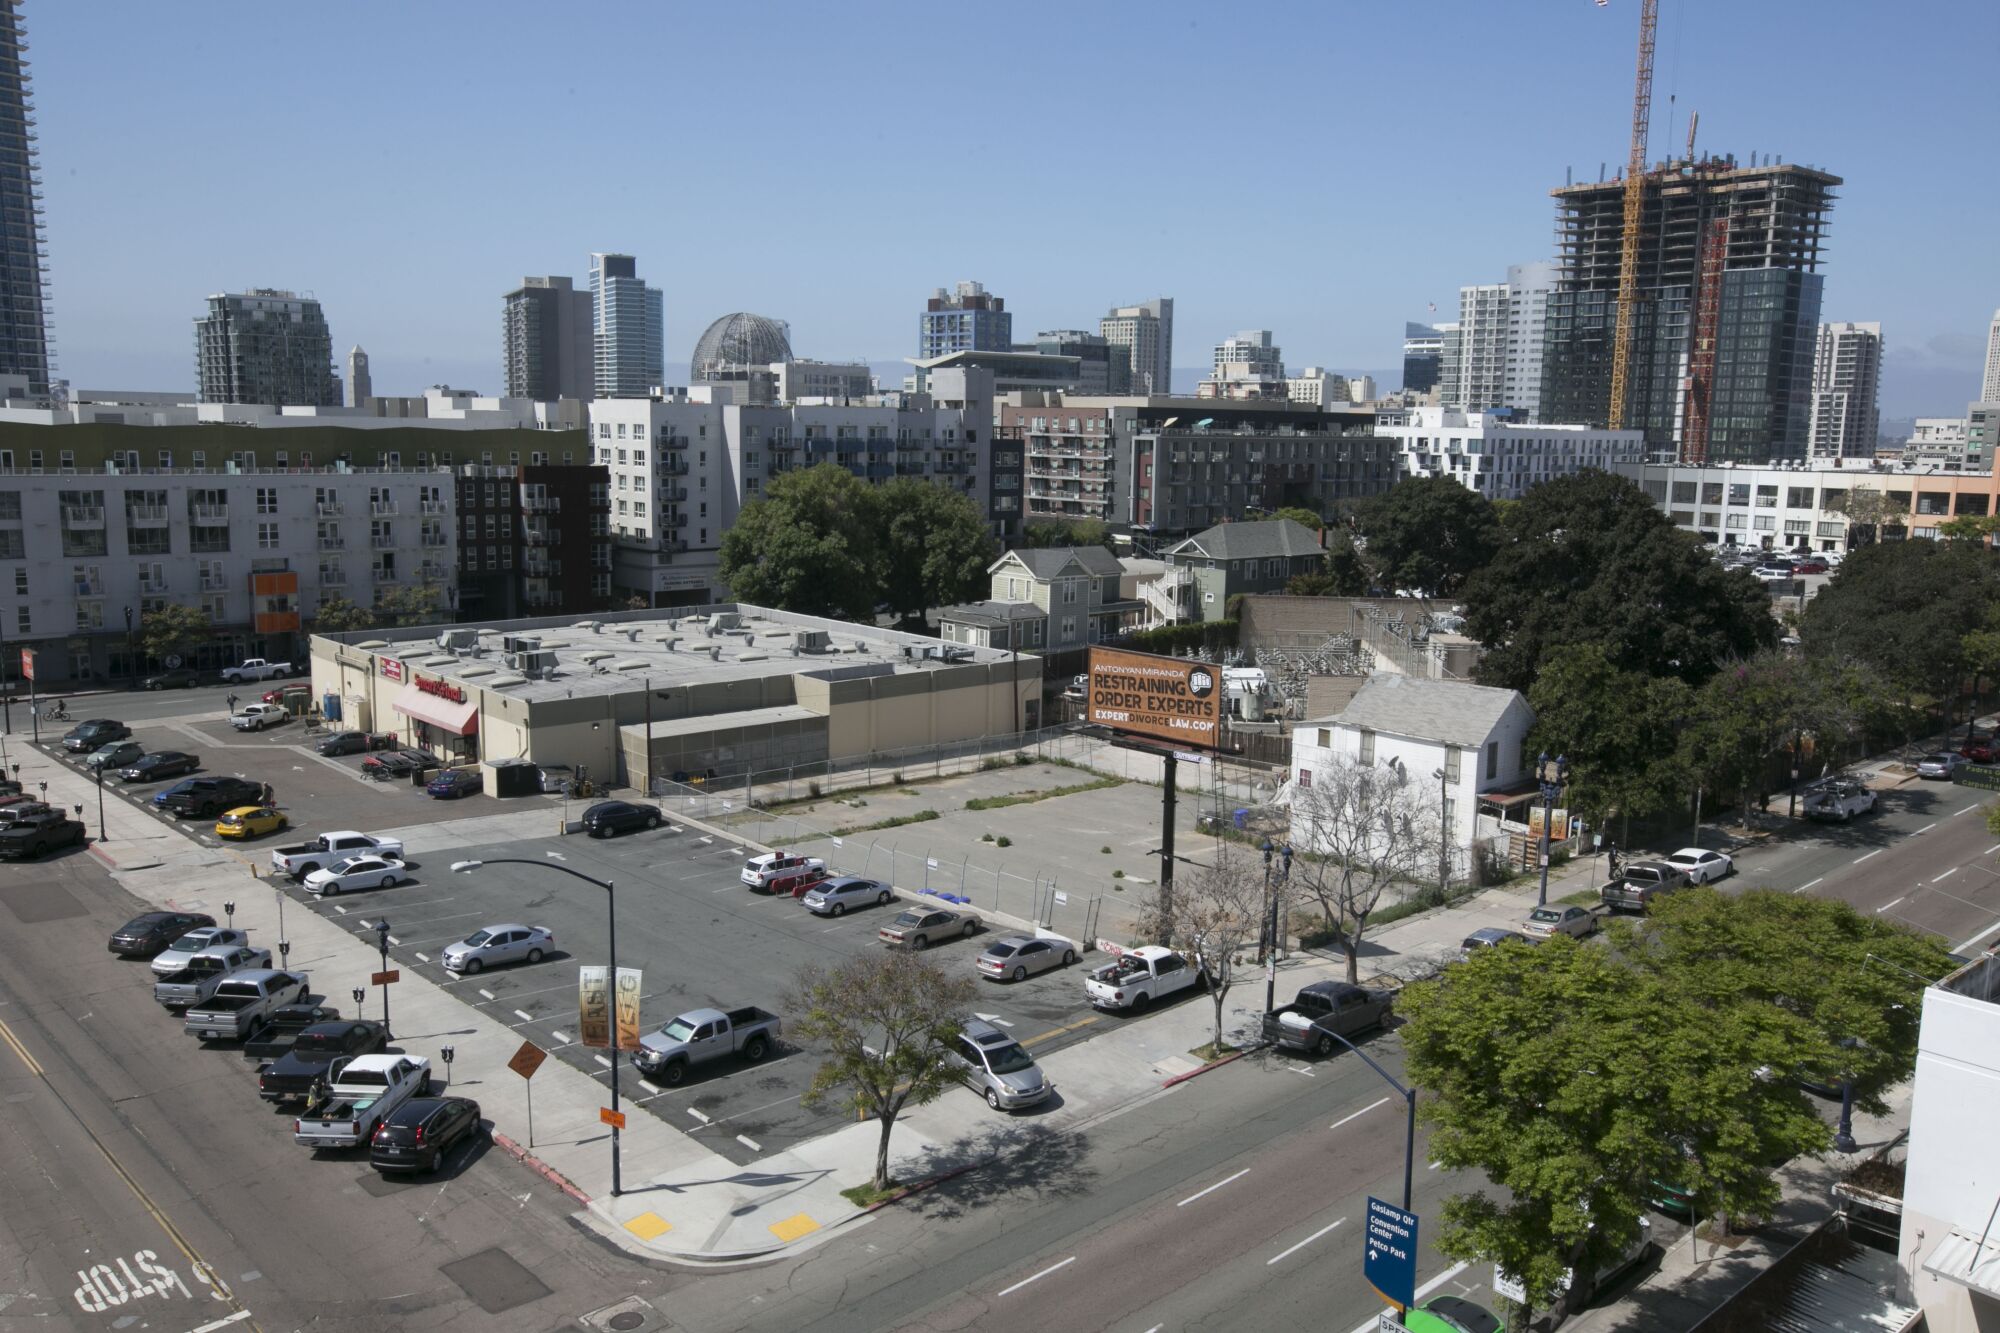 The park is proposed to take over the East Village blocks between 13th, F, 15th and G streets. It now houses parking lots, storage lots, a few businesses and less than a dozen houses.